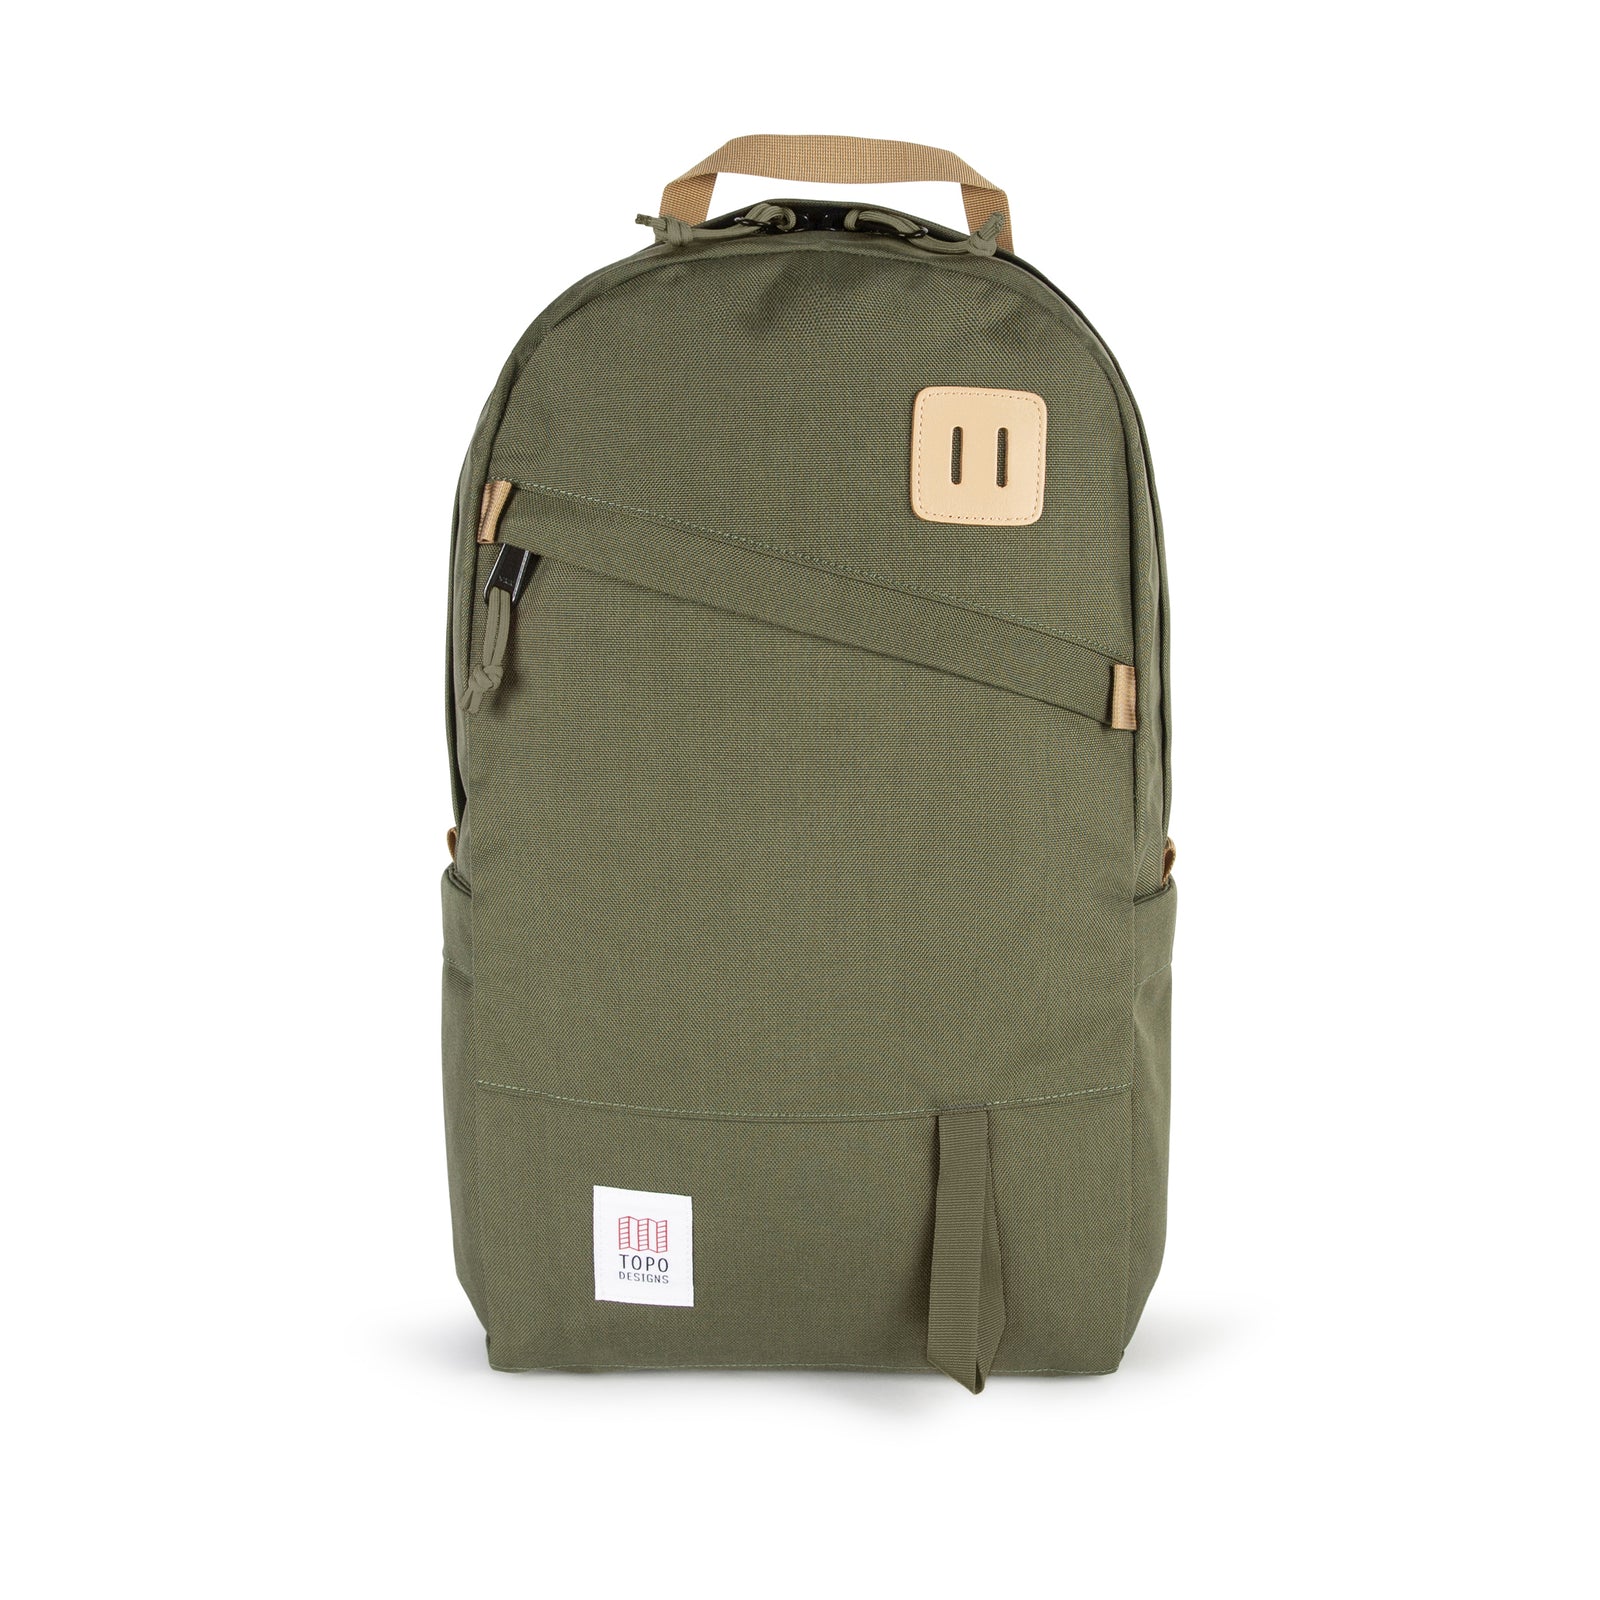 Topo Designs Daypack Classic 100% recycled nylon laptop backpack for work or school in "Olive"